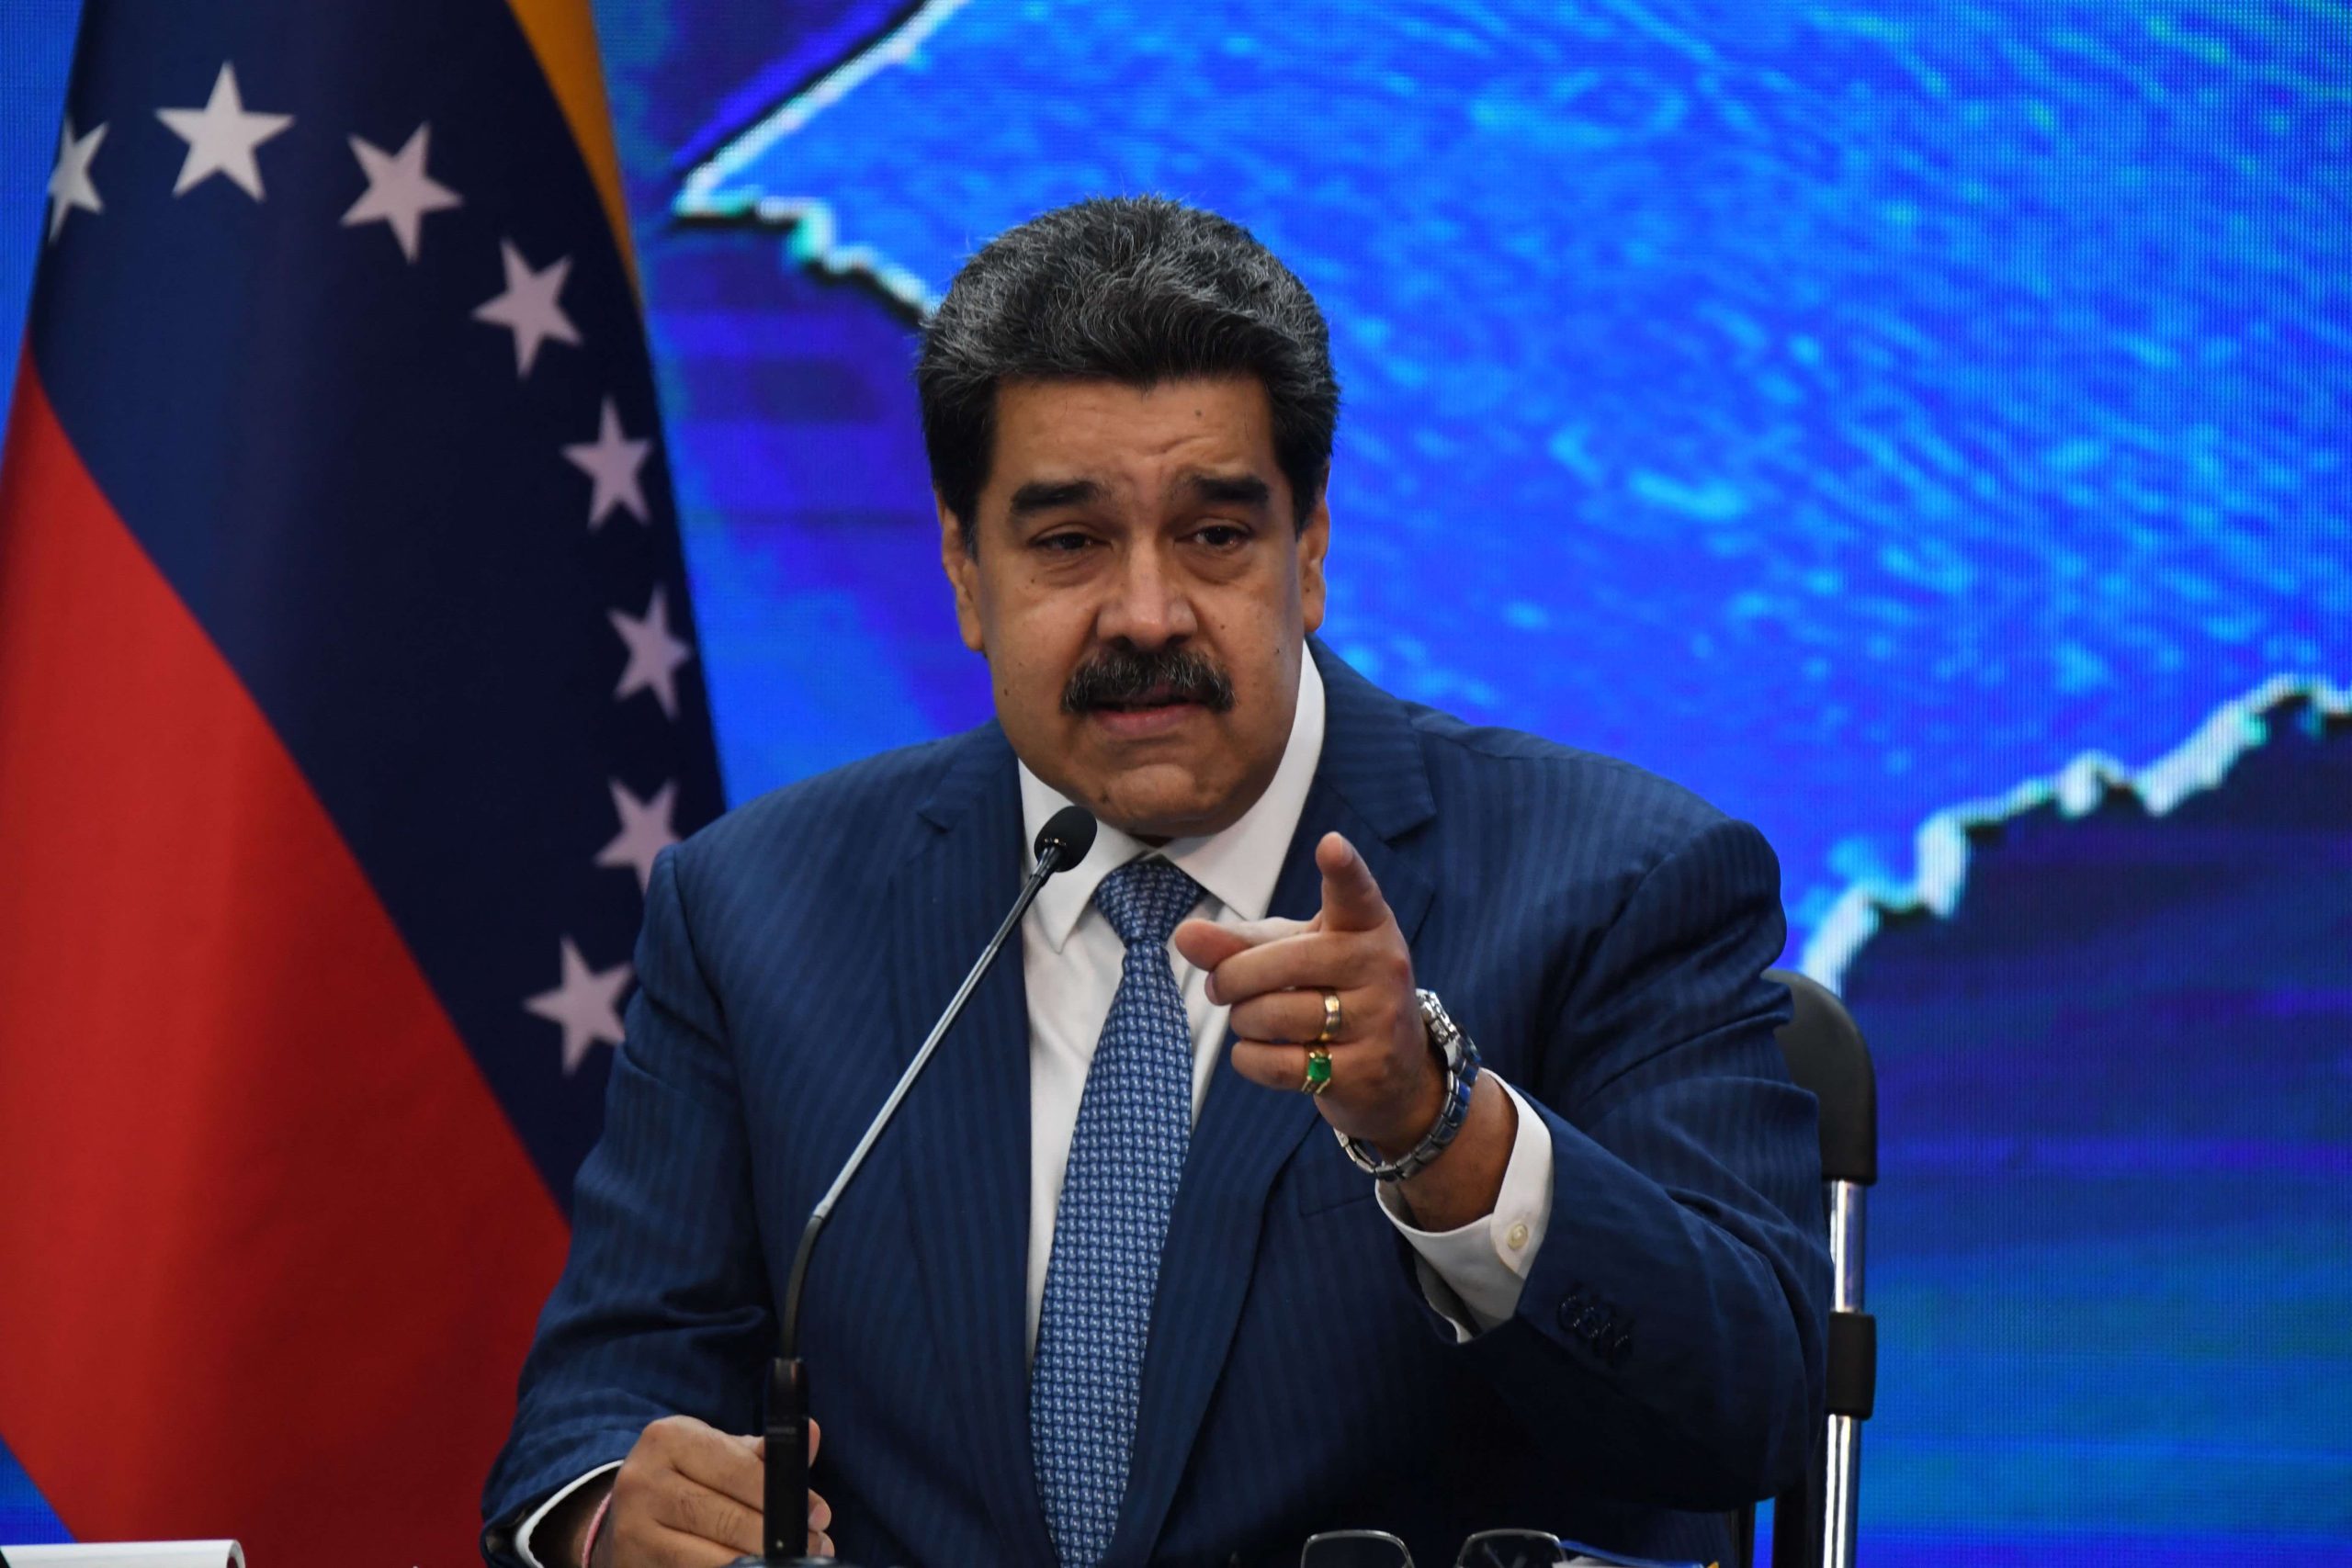 Maduro confirmed the meeting with US officials